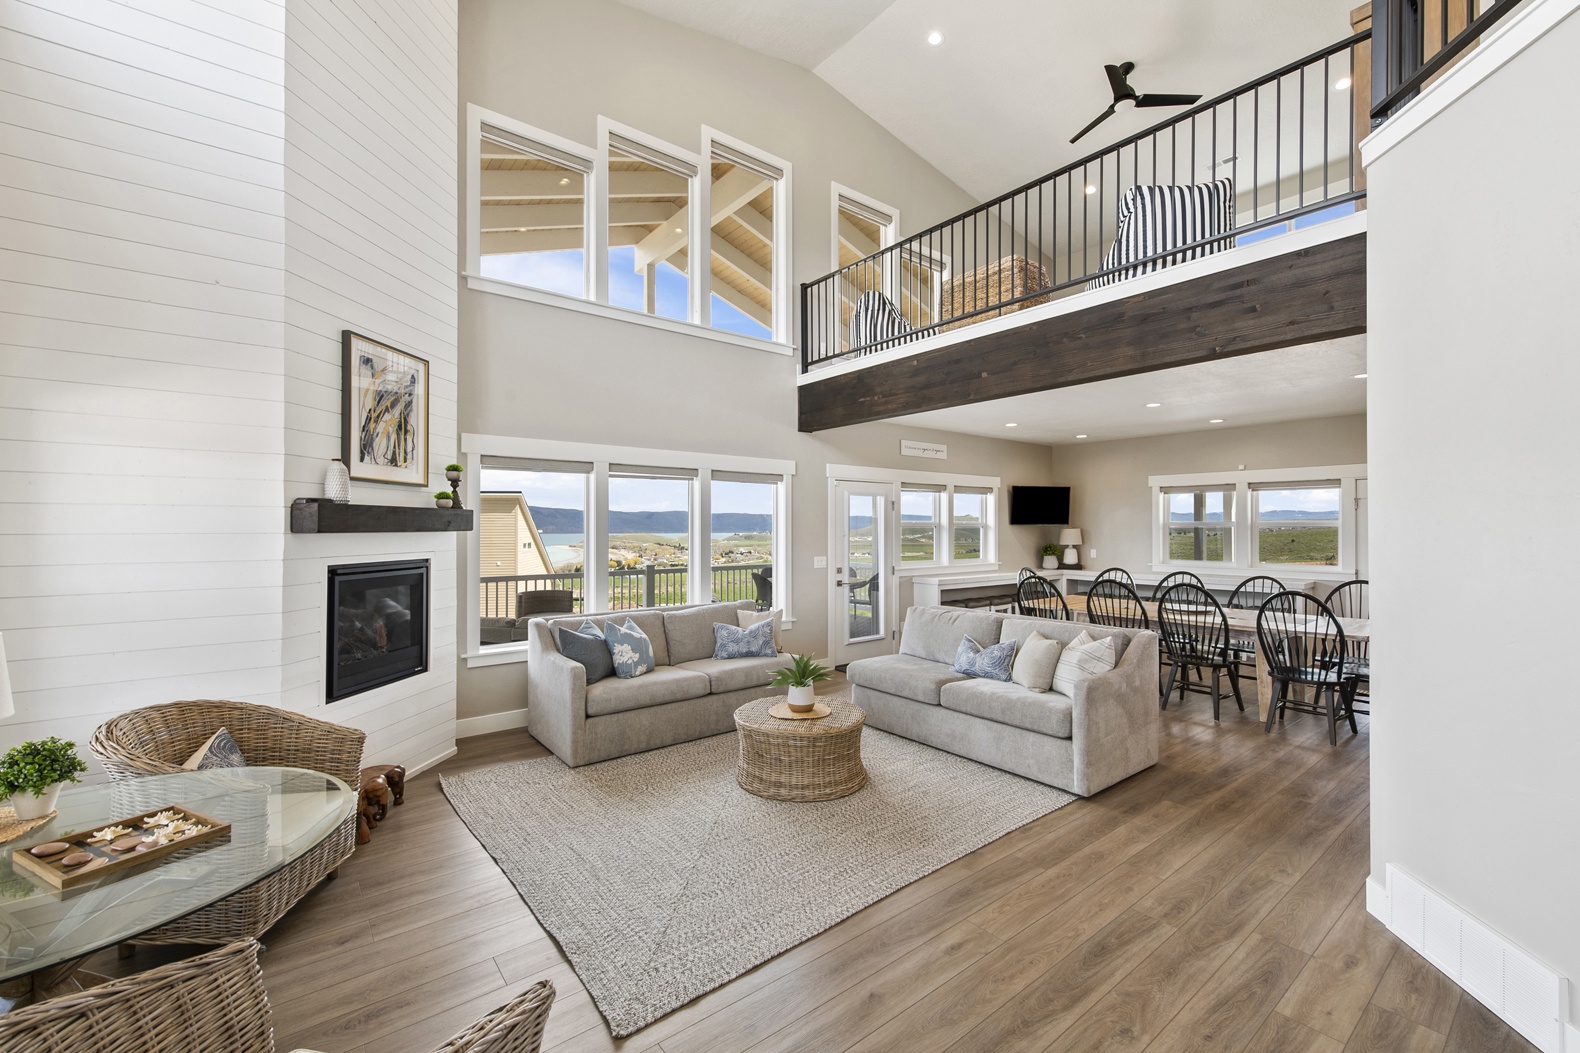 Persimmon Hill-Main living room and loft area